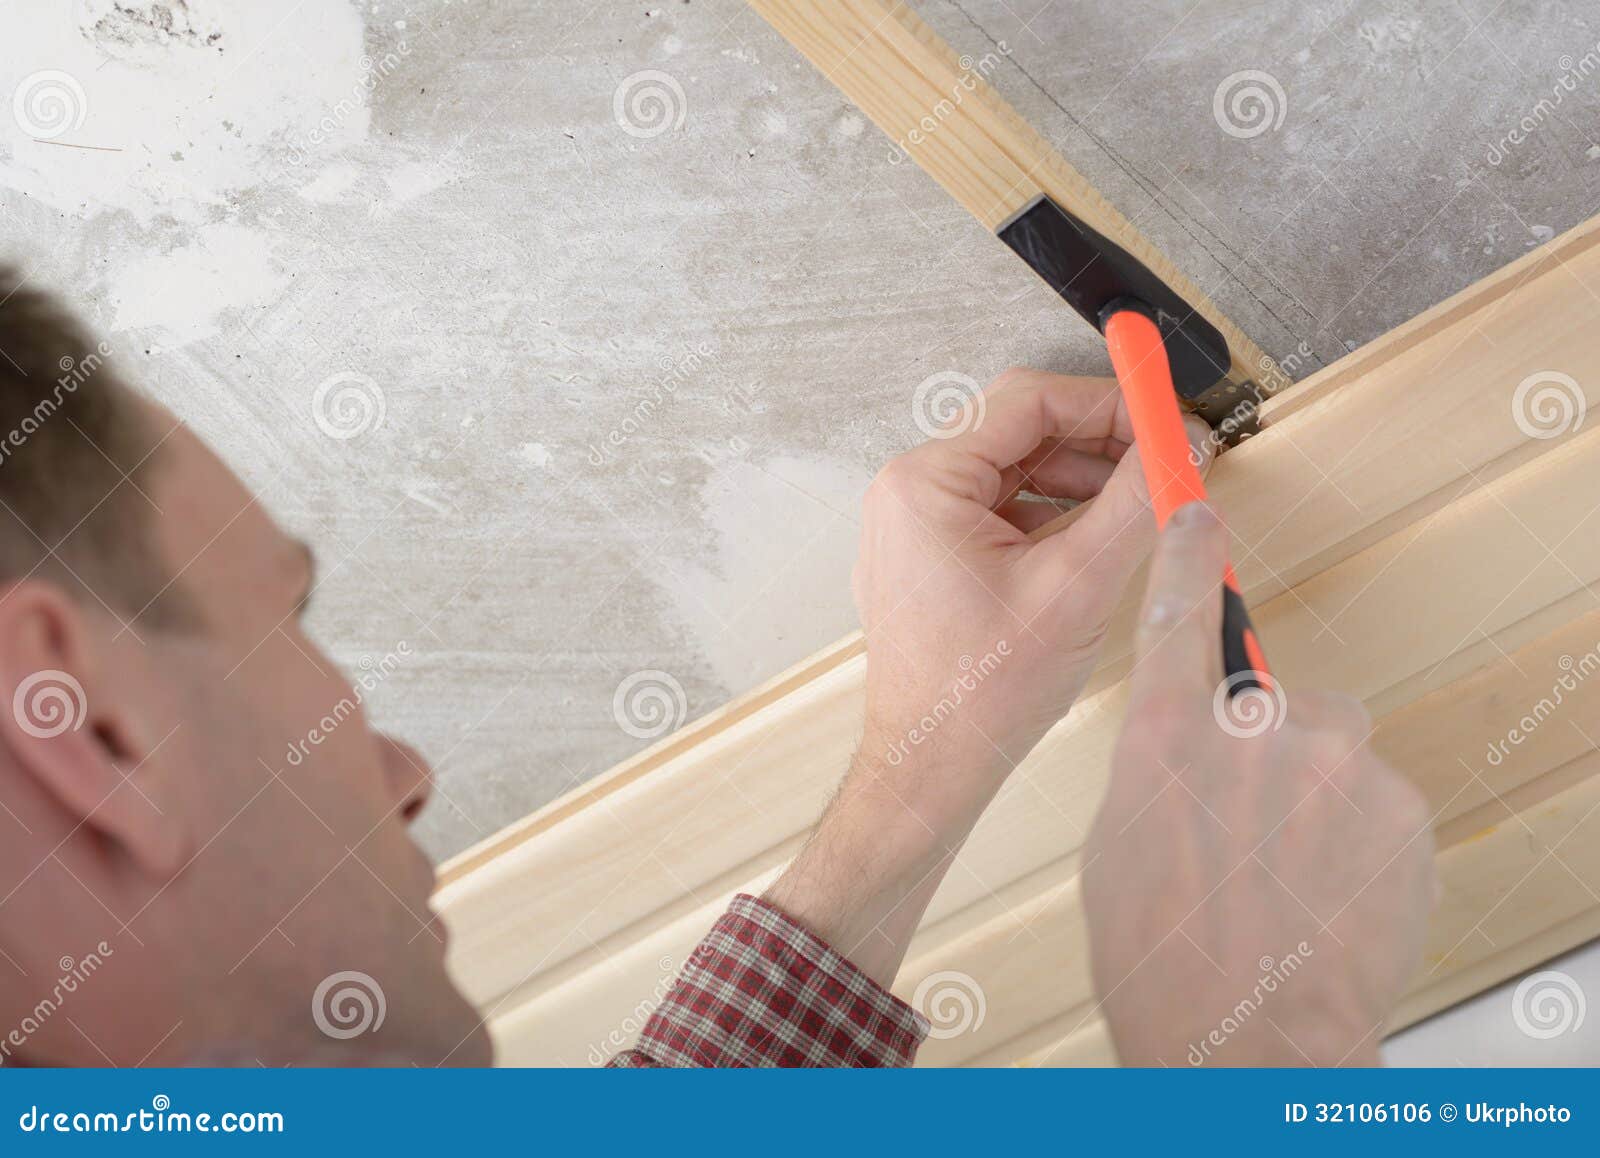 Wood Panelling The Ceiling Stock Photo Image Of Home 32106106